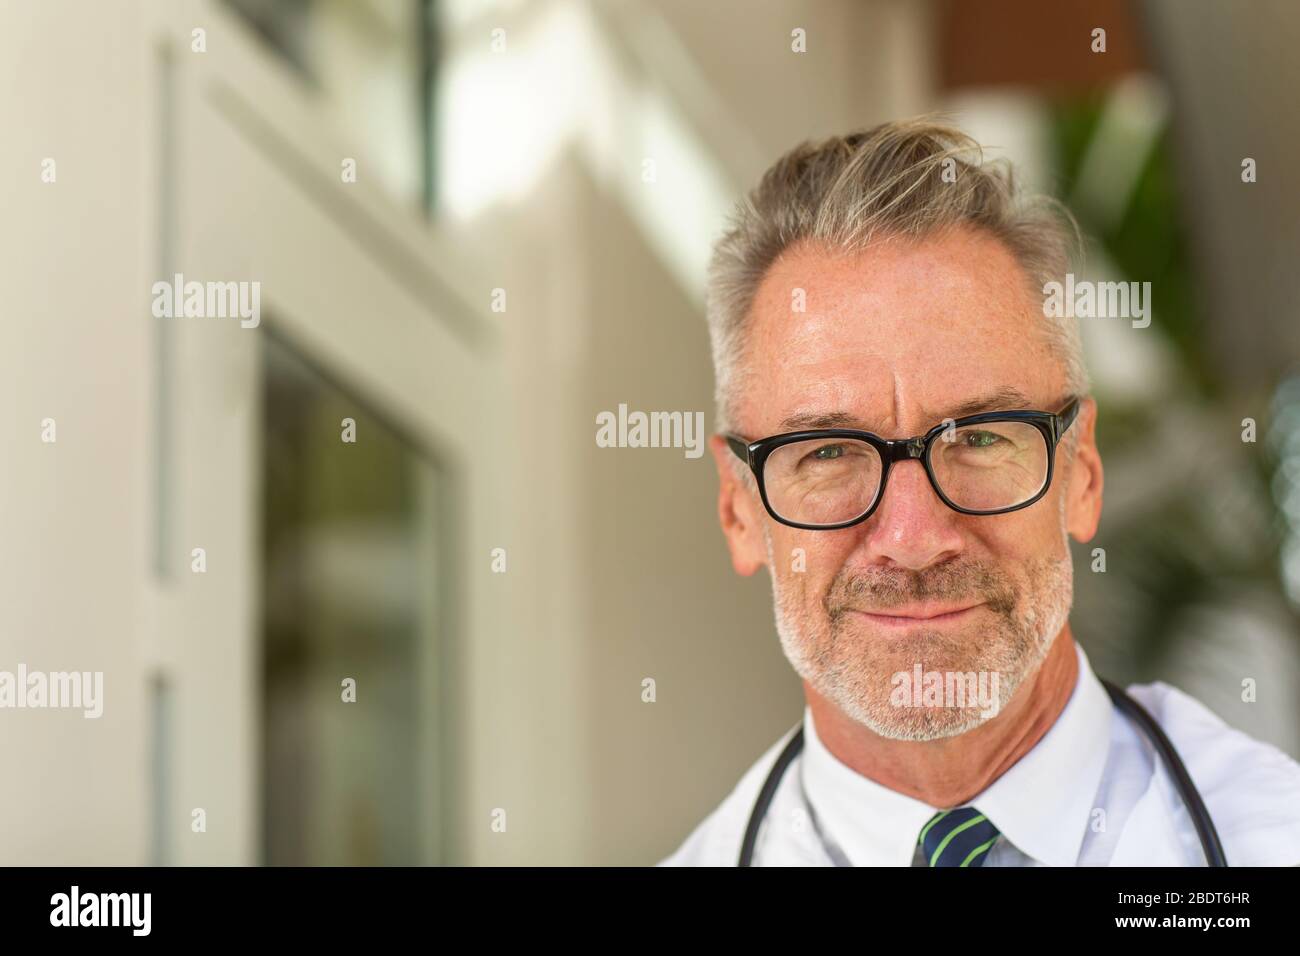 Portrait of a mature handsome doctor at a medical office. Stock Photo